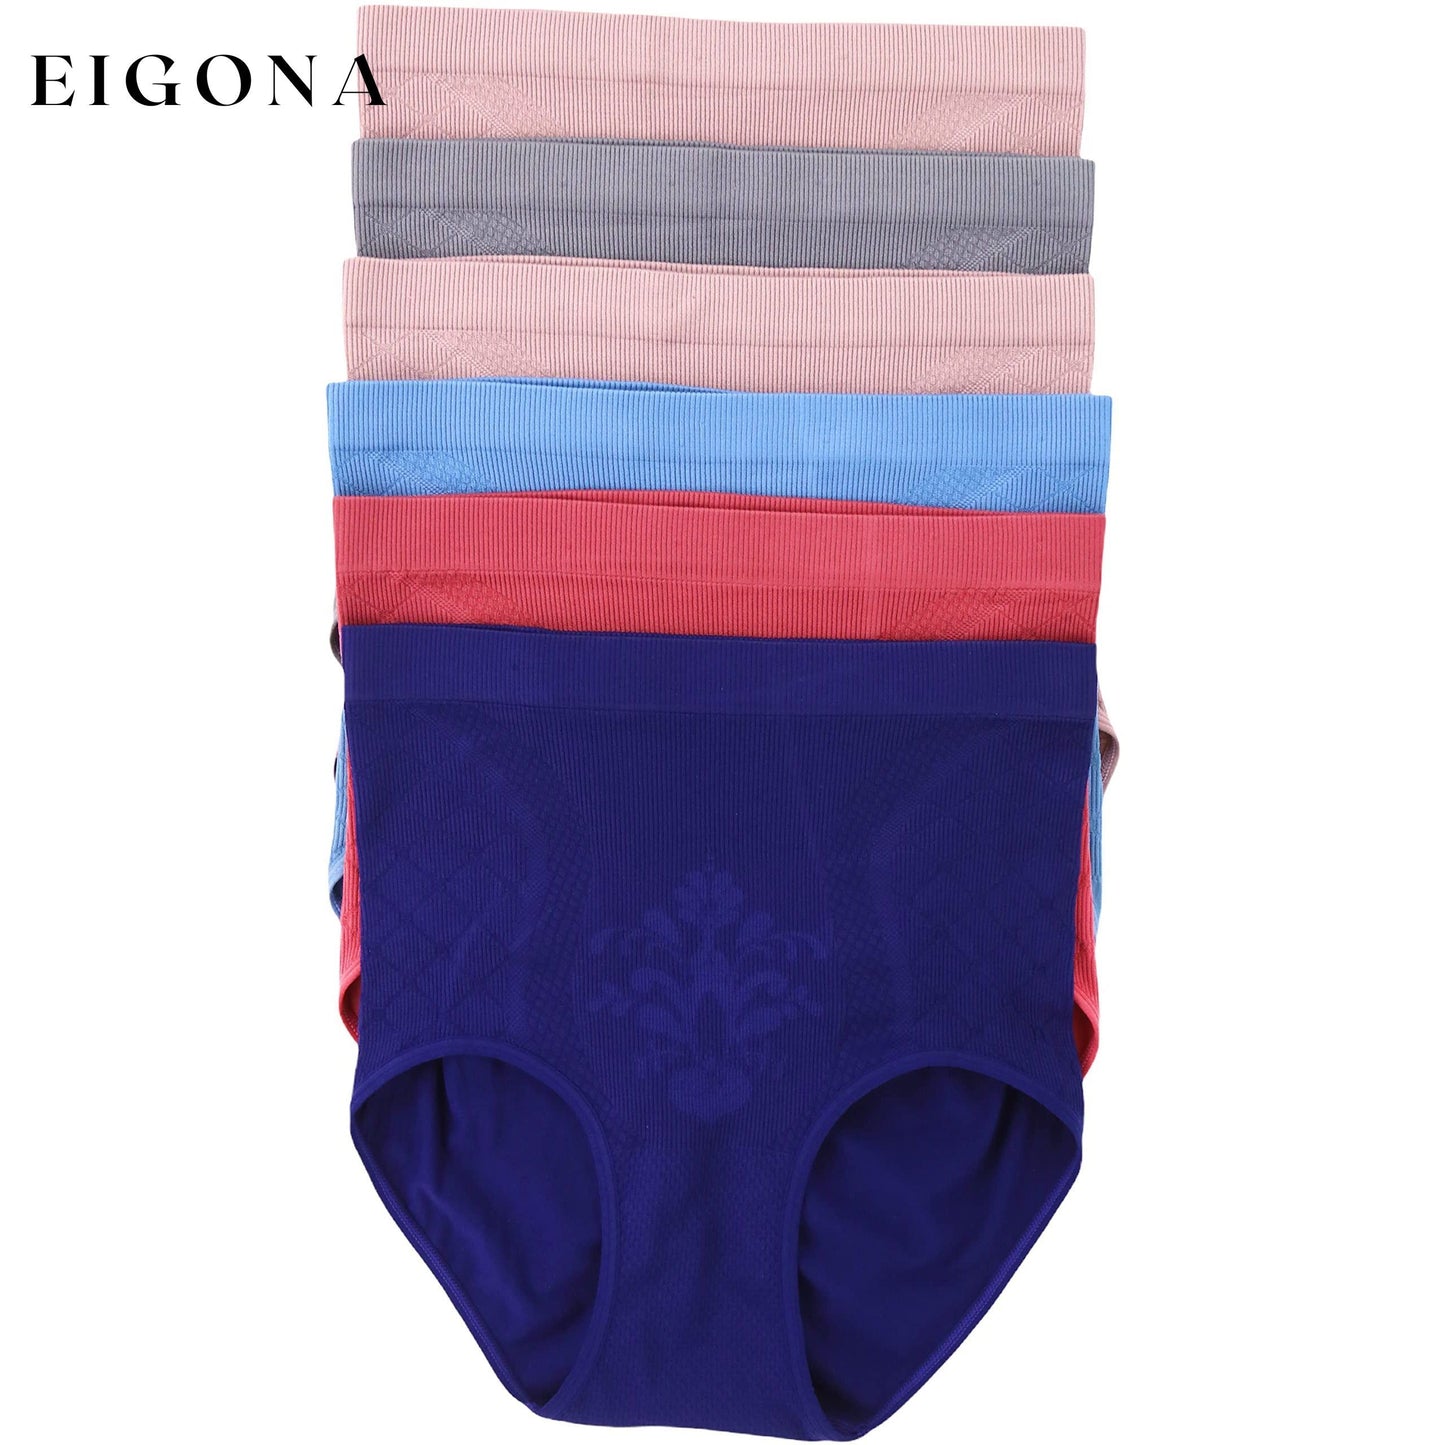 6-Pack: Women's Soft Pastel Floral Front High-Waisted Briefs __stock:100 lingerie refund_fee:1200